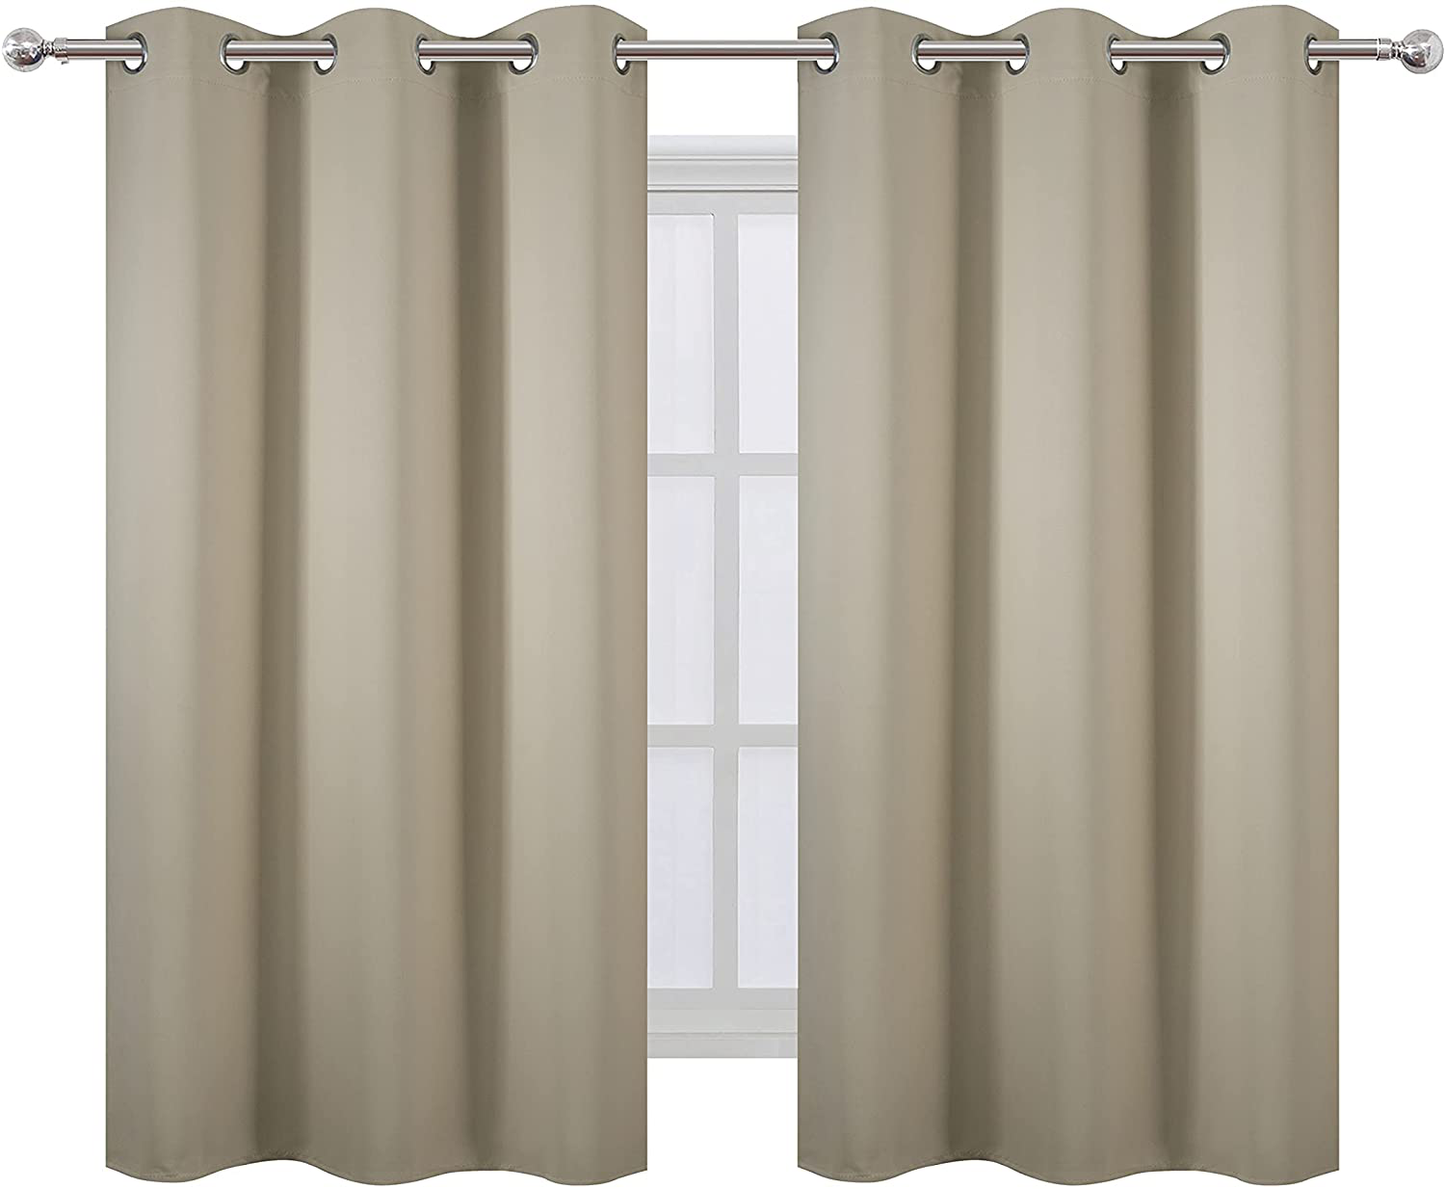 LEMOMO Burgundy Red Thermal Blackout Curtains/38 x 63 Inch/Set of 2 Panels Room Darkening Curtains for Bedroom